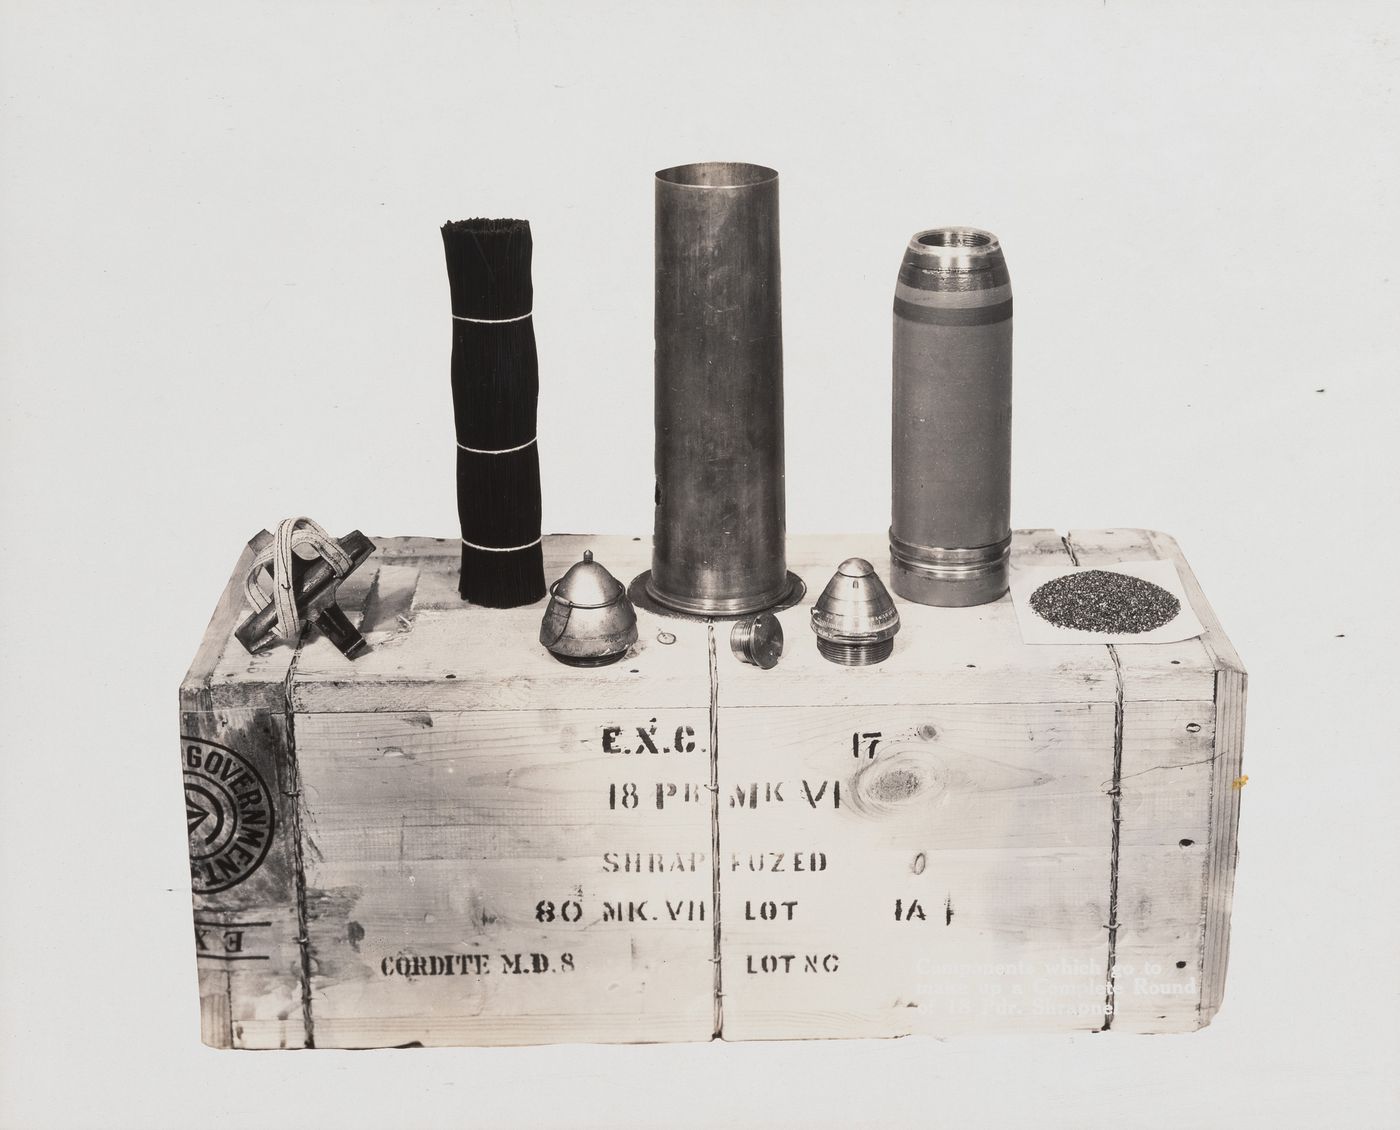 View of components of a complete round at the Energite Explosives Plant No. 3, the Shell Loading Plant, Renfrew, Ontario, Canada